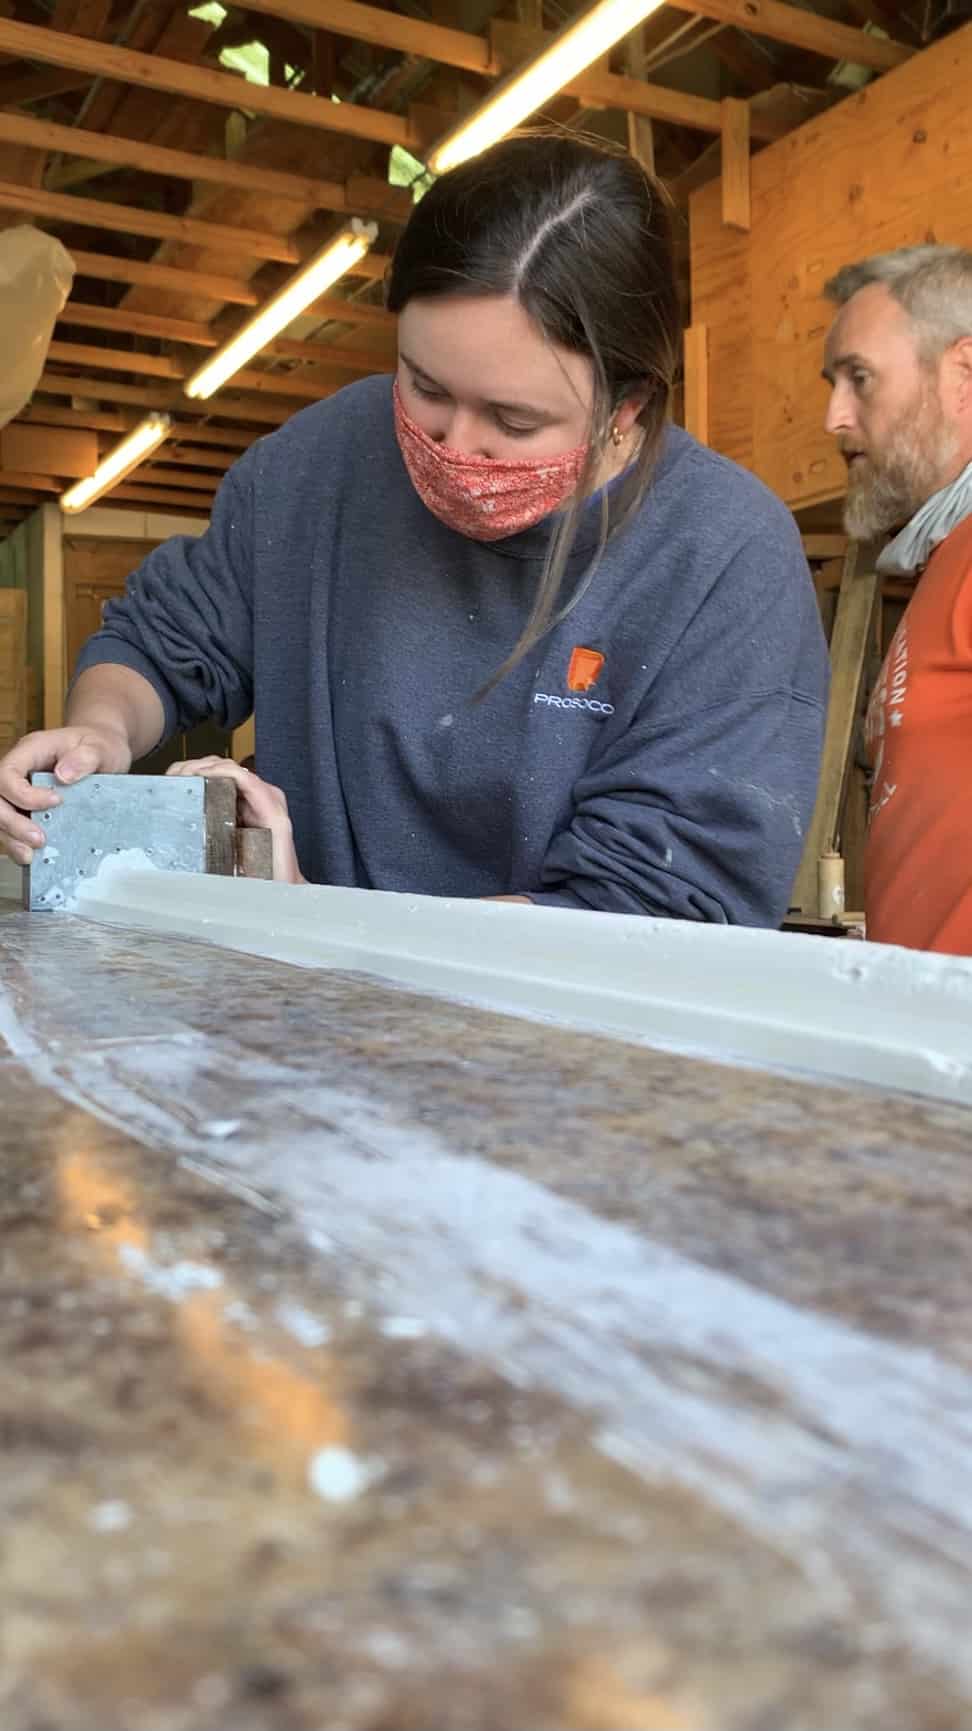 Riley Morris is currently in her final year of a master’s program in historic building preservation through Clemson and the College of Charleston in South Carolina.